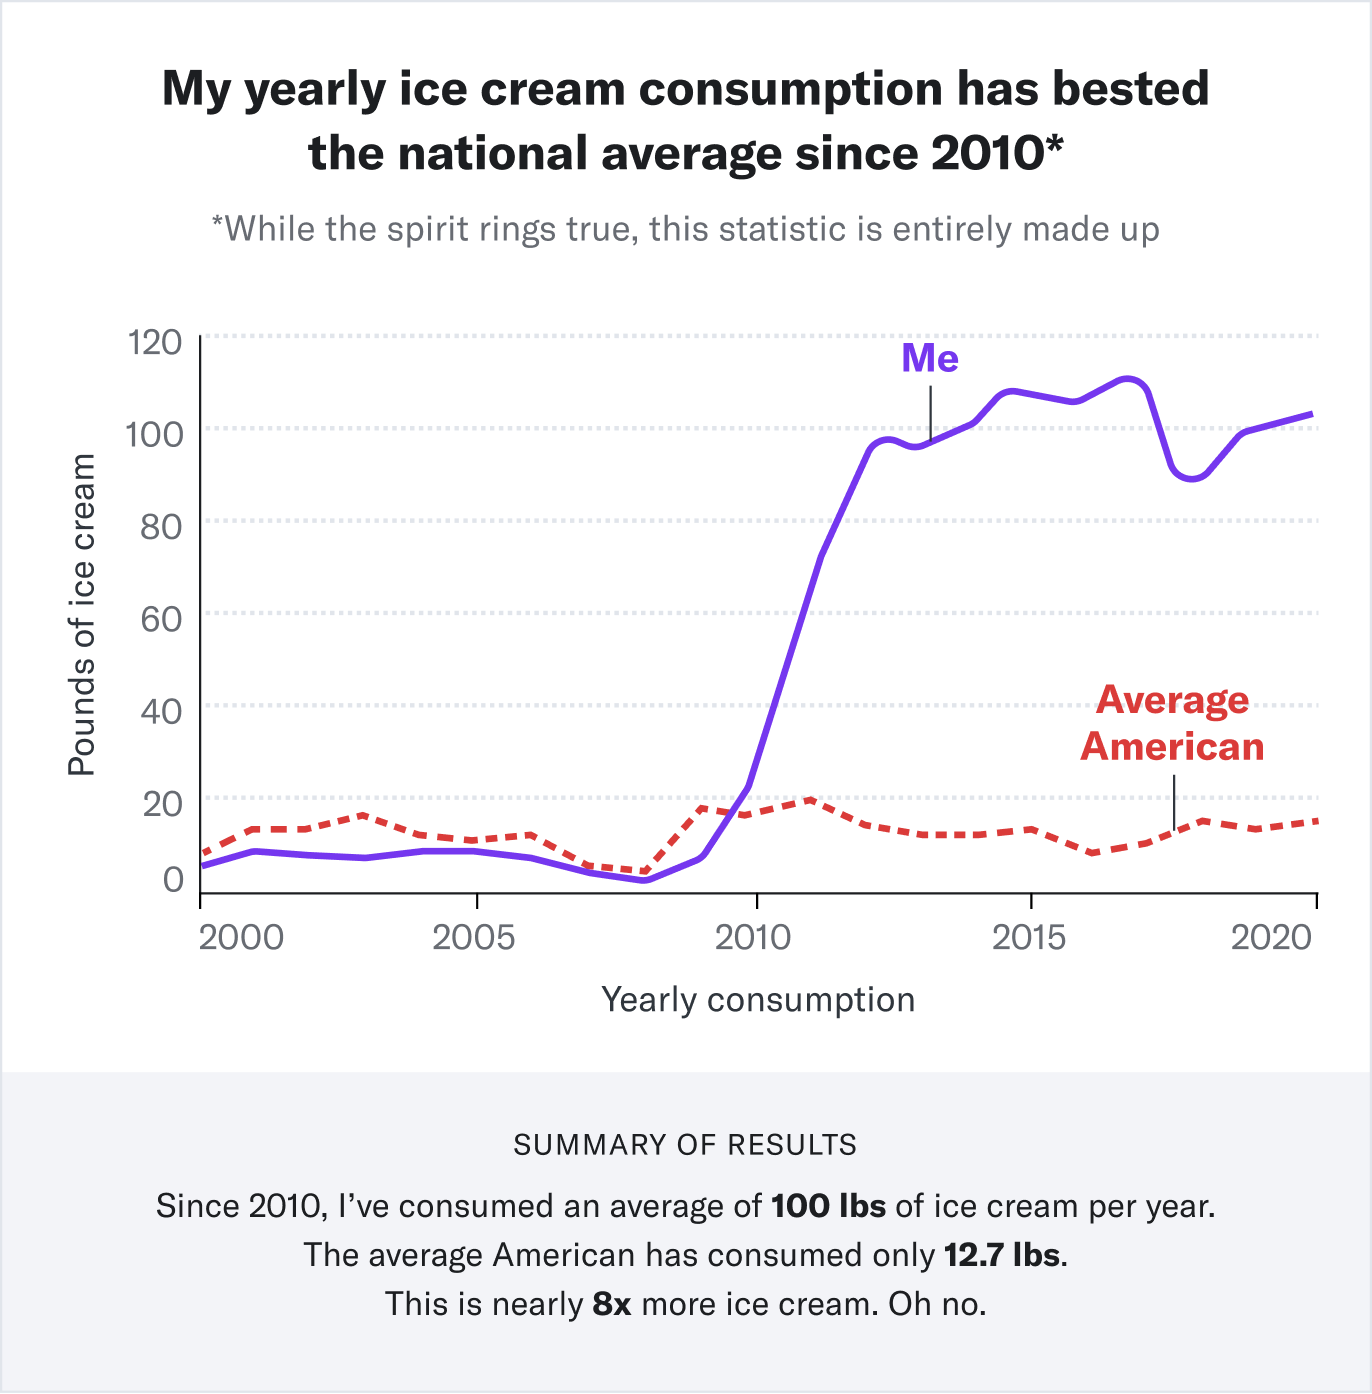 A sample graph titled: My yearly ice cream consumption has bested the national average since 2010. From the years 2000 to 2010, the yearly ice cream consumption levels of myself and the average American are similar. Around 2010, my consumption level spikes much higher and remains that way to the present day. The summary of the data is as follows: Since 2010, I have consumed an average of 100 pounds of ice cream per year. The average American has consumed only 12.7 pounds. This is nearly 8 times more ice cream. Oh no.